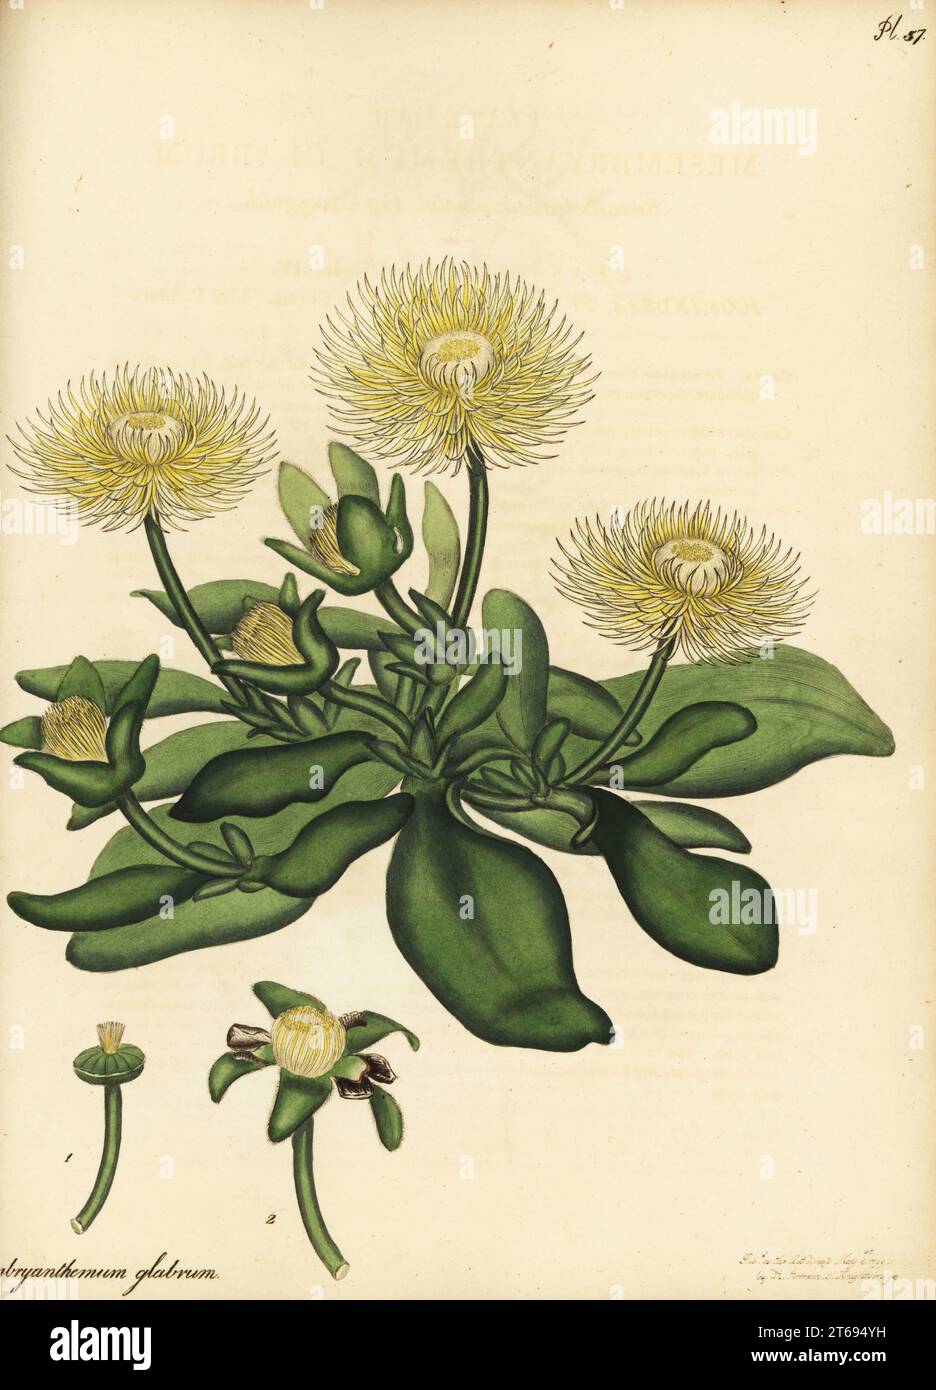 Hymenogyne glabra, native to South Africa. Smooth-leaved annual fig marygold, Mesembryanthemum glabrum. Copperplate engraving drawn, engraved and hand-coloured by Henry Andrews from his Botanical Register, Volume 1, published in London, 1799. Stock Photo